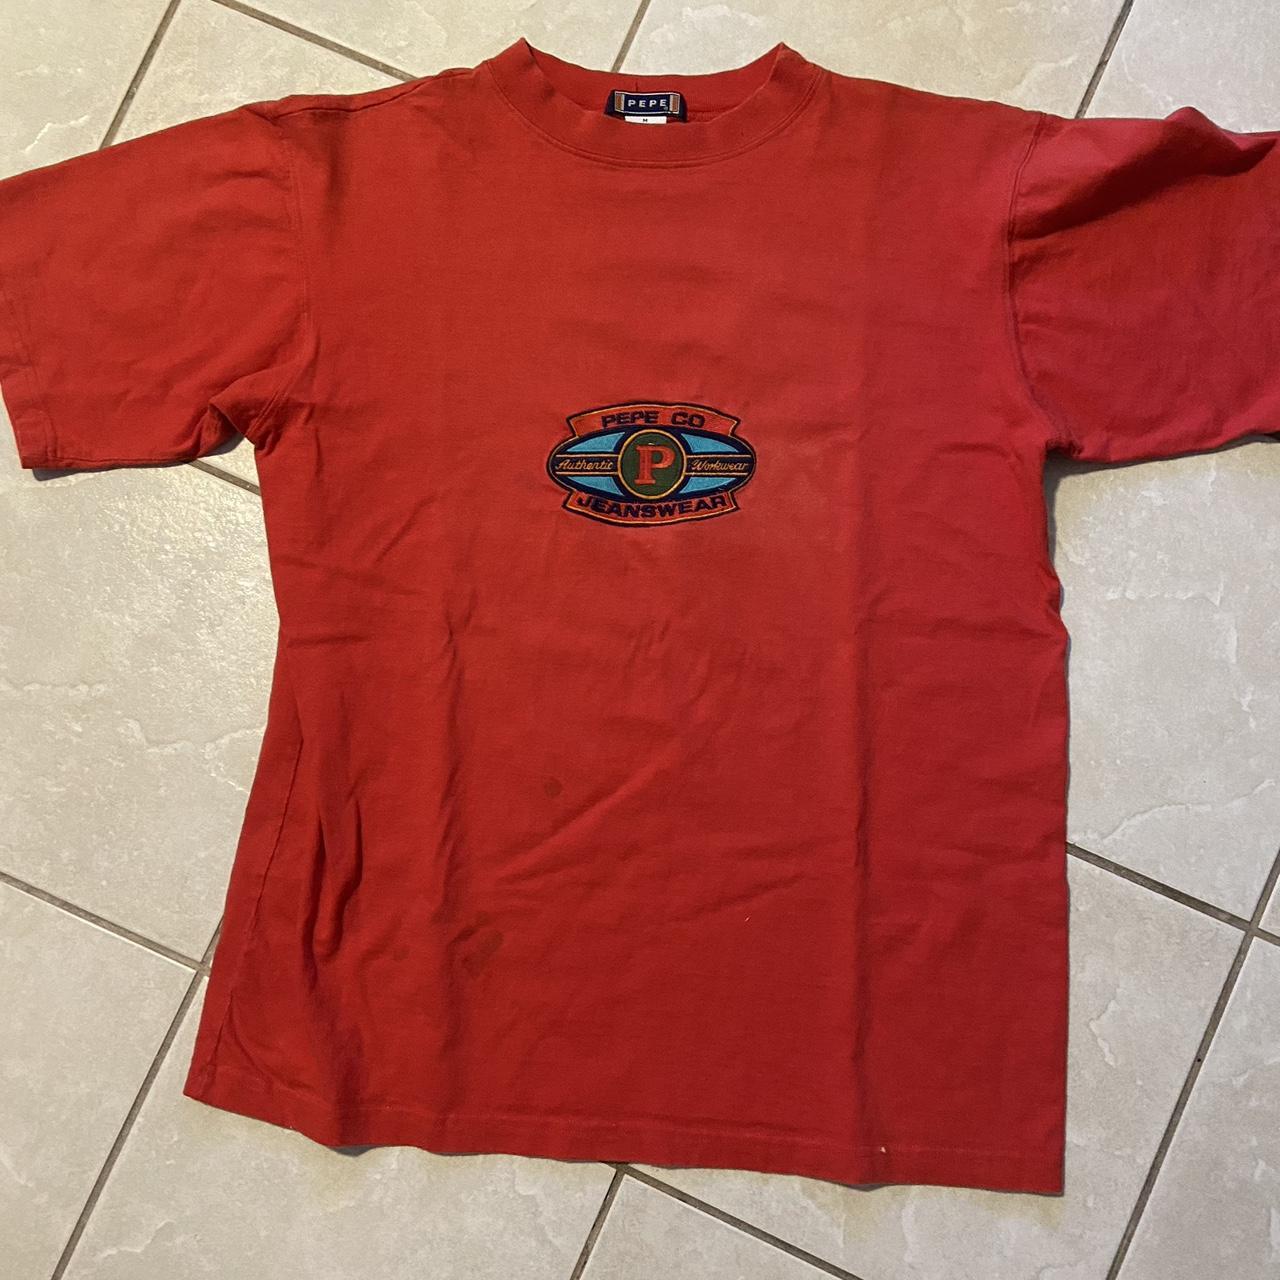 vintage #pepe #jeans - #made Depop USA #tee in Flaw